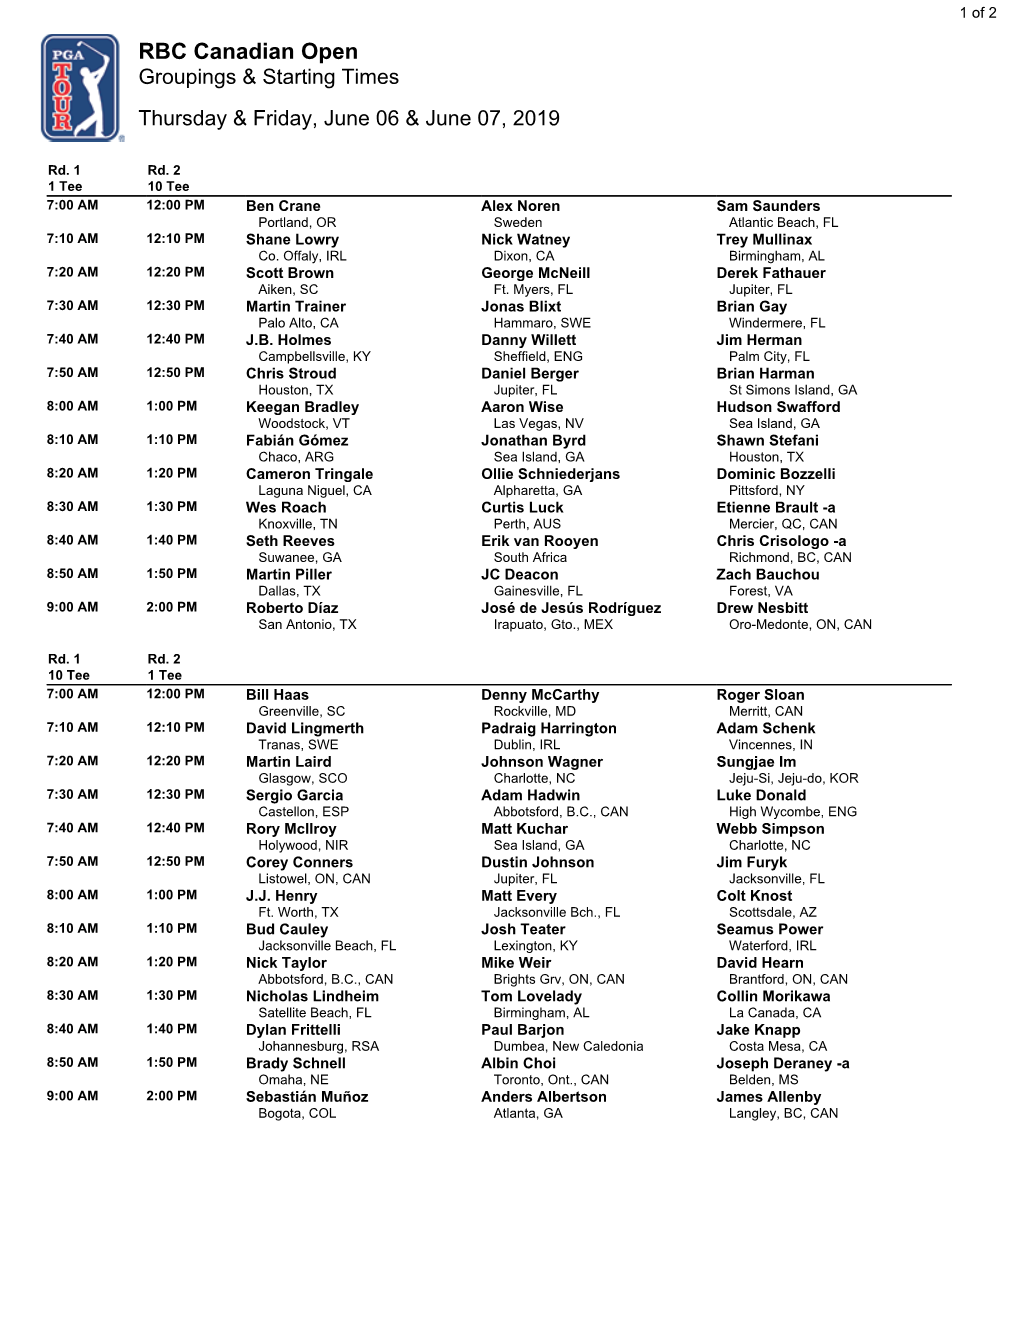 RBC Canadian Open Groupings & Starting Times Thursday & Friday, June 06 & June 07, 2019